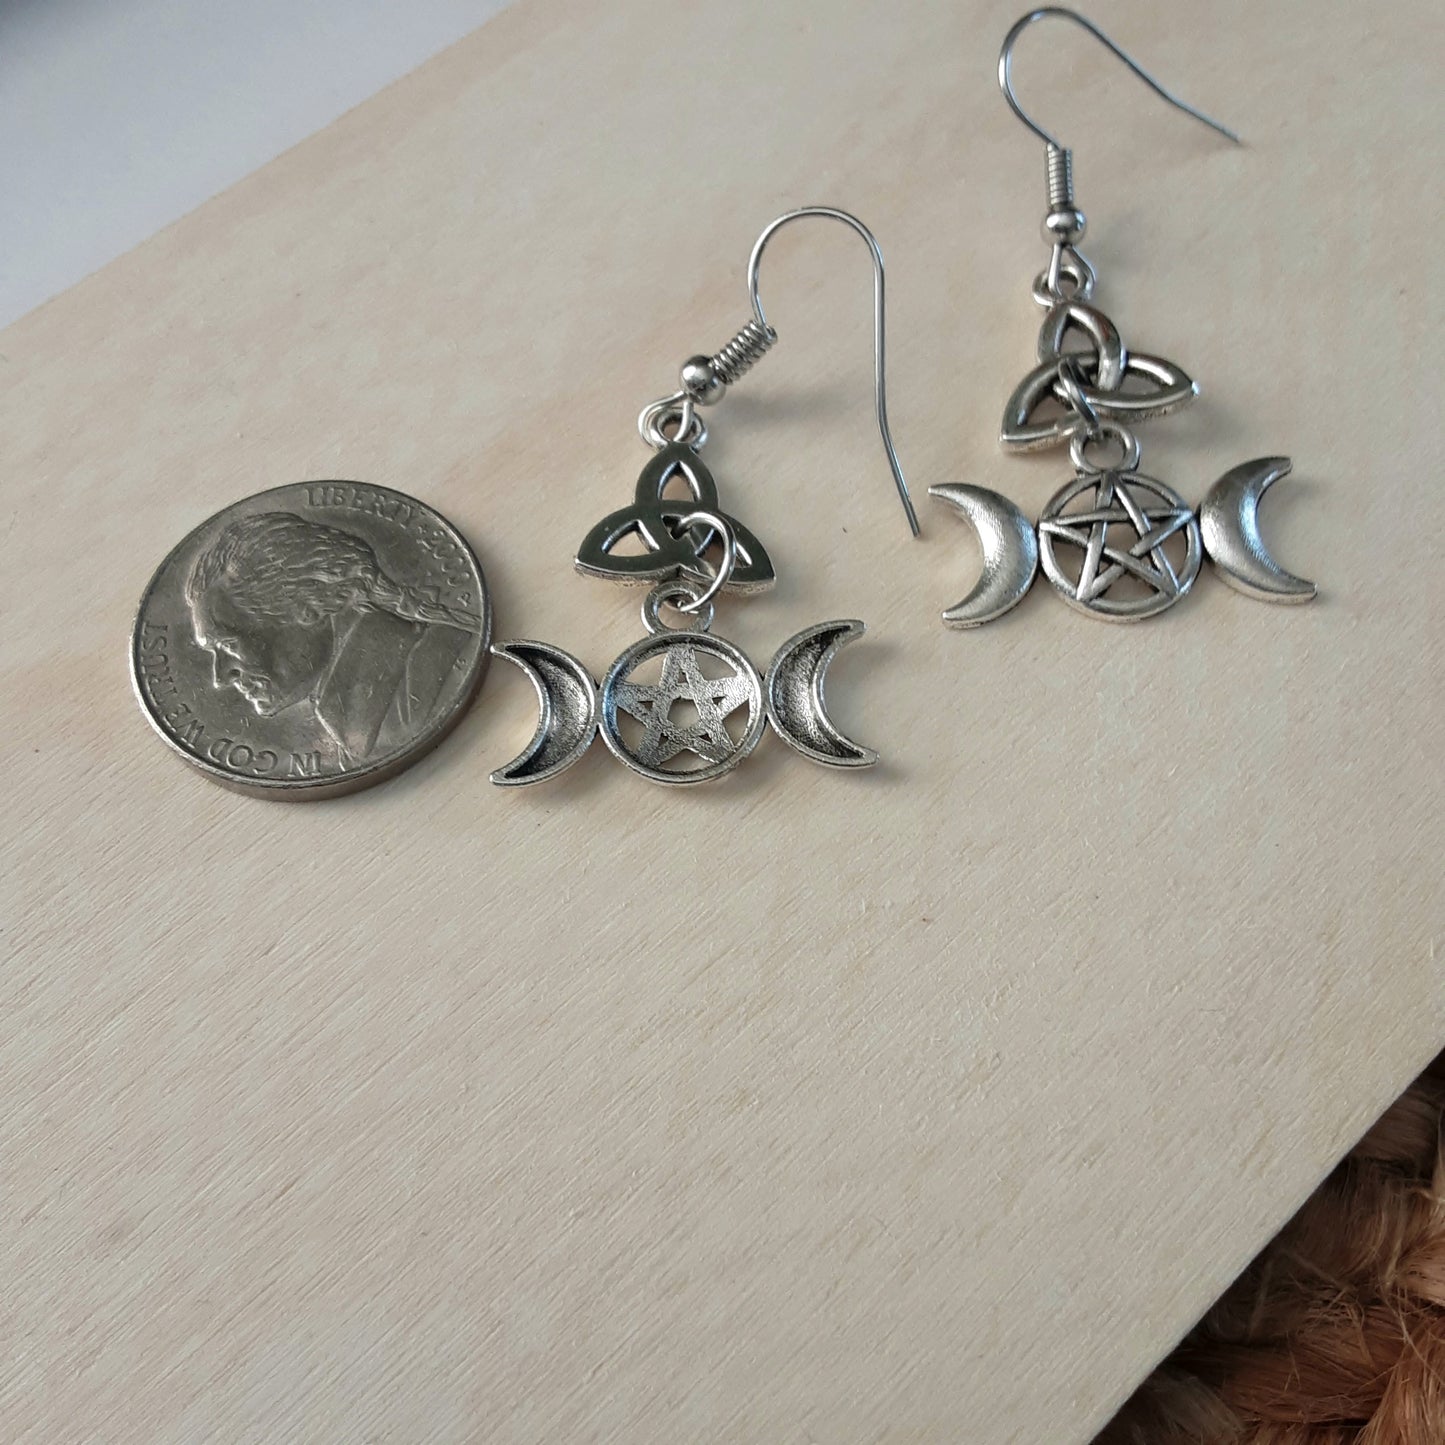 The Morrigan earrings Triquetra and Triple Moon Goddess